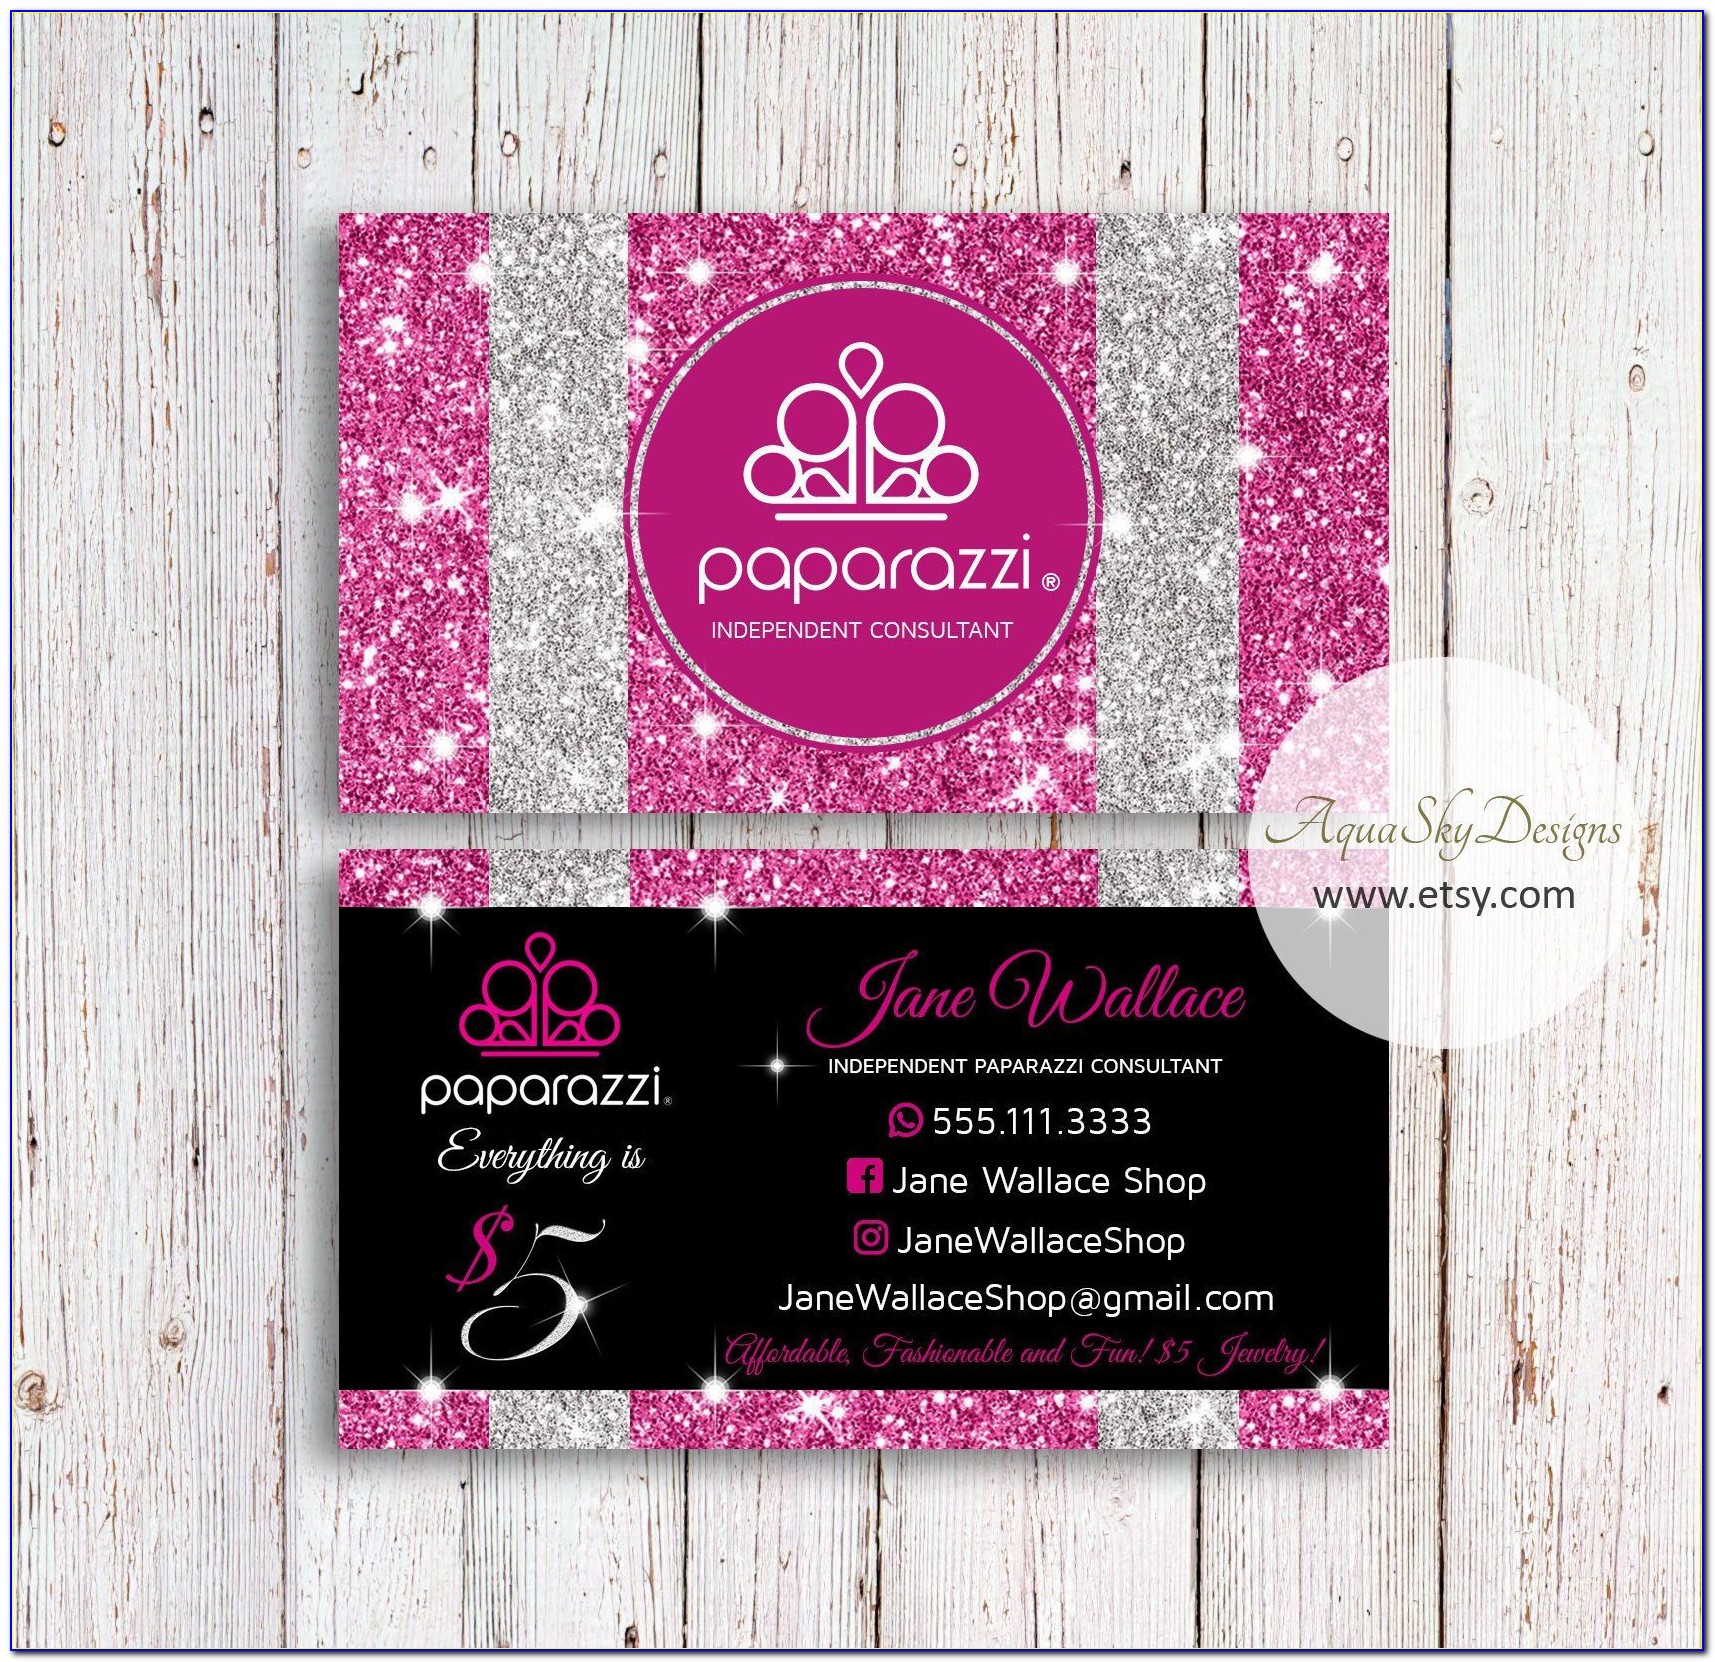 Paparazzi Business Card Template Free